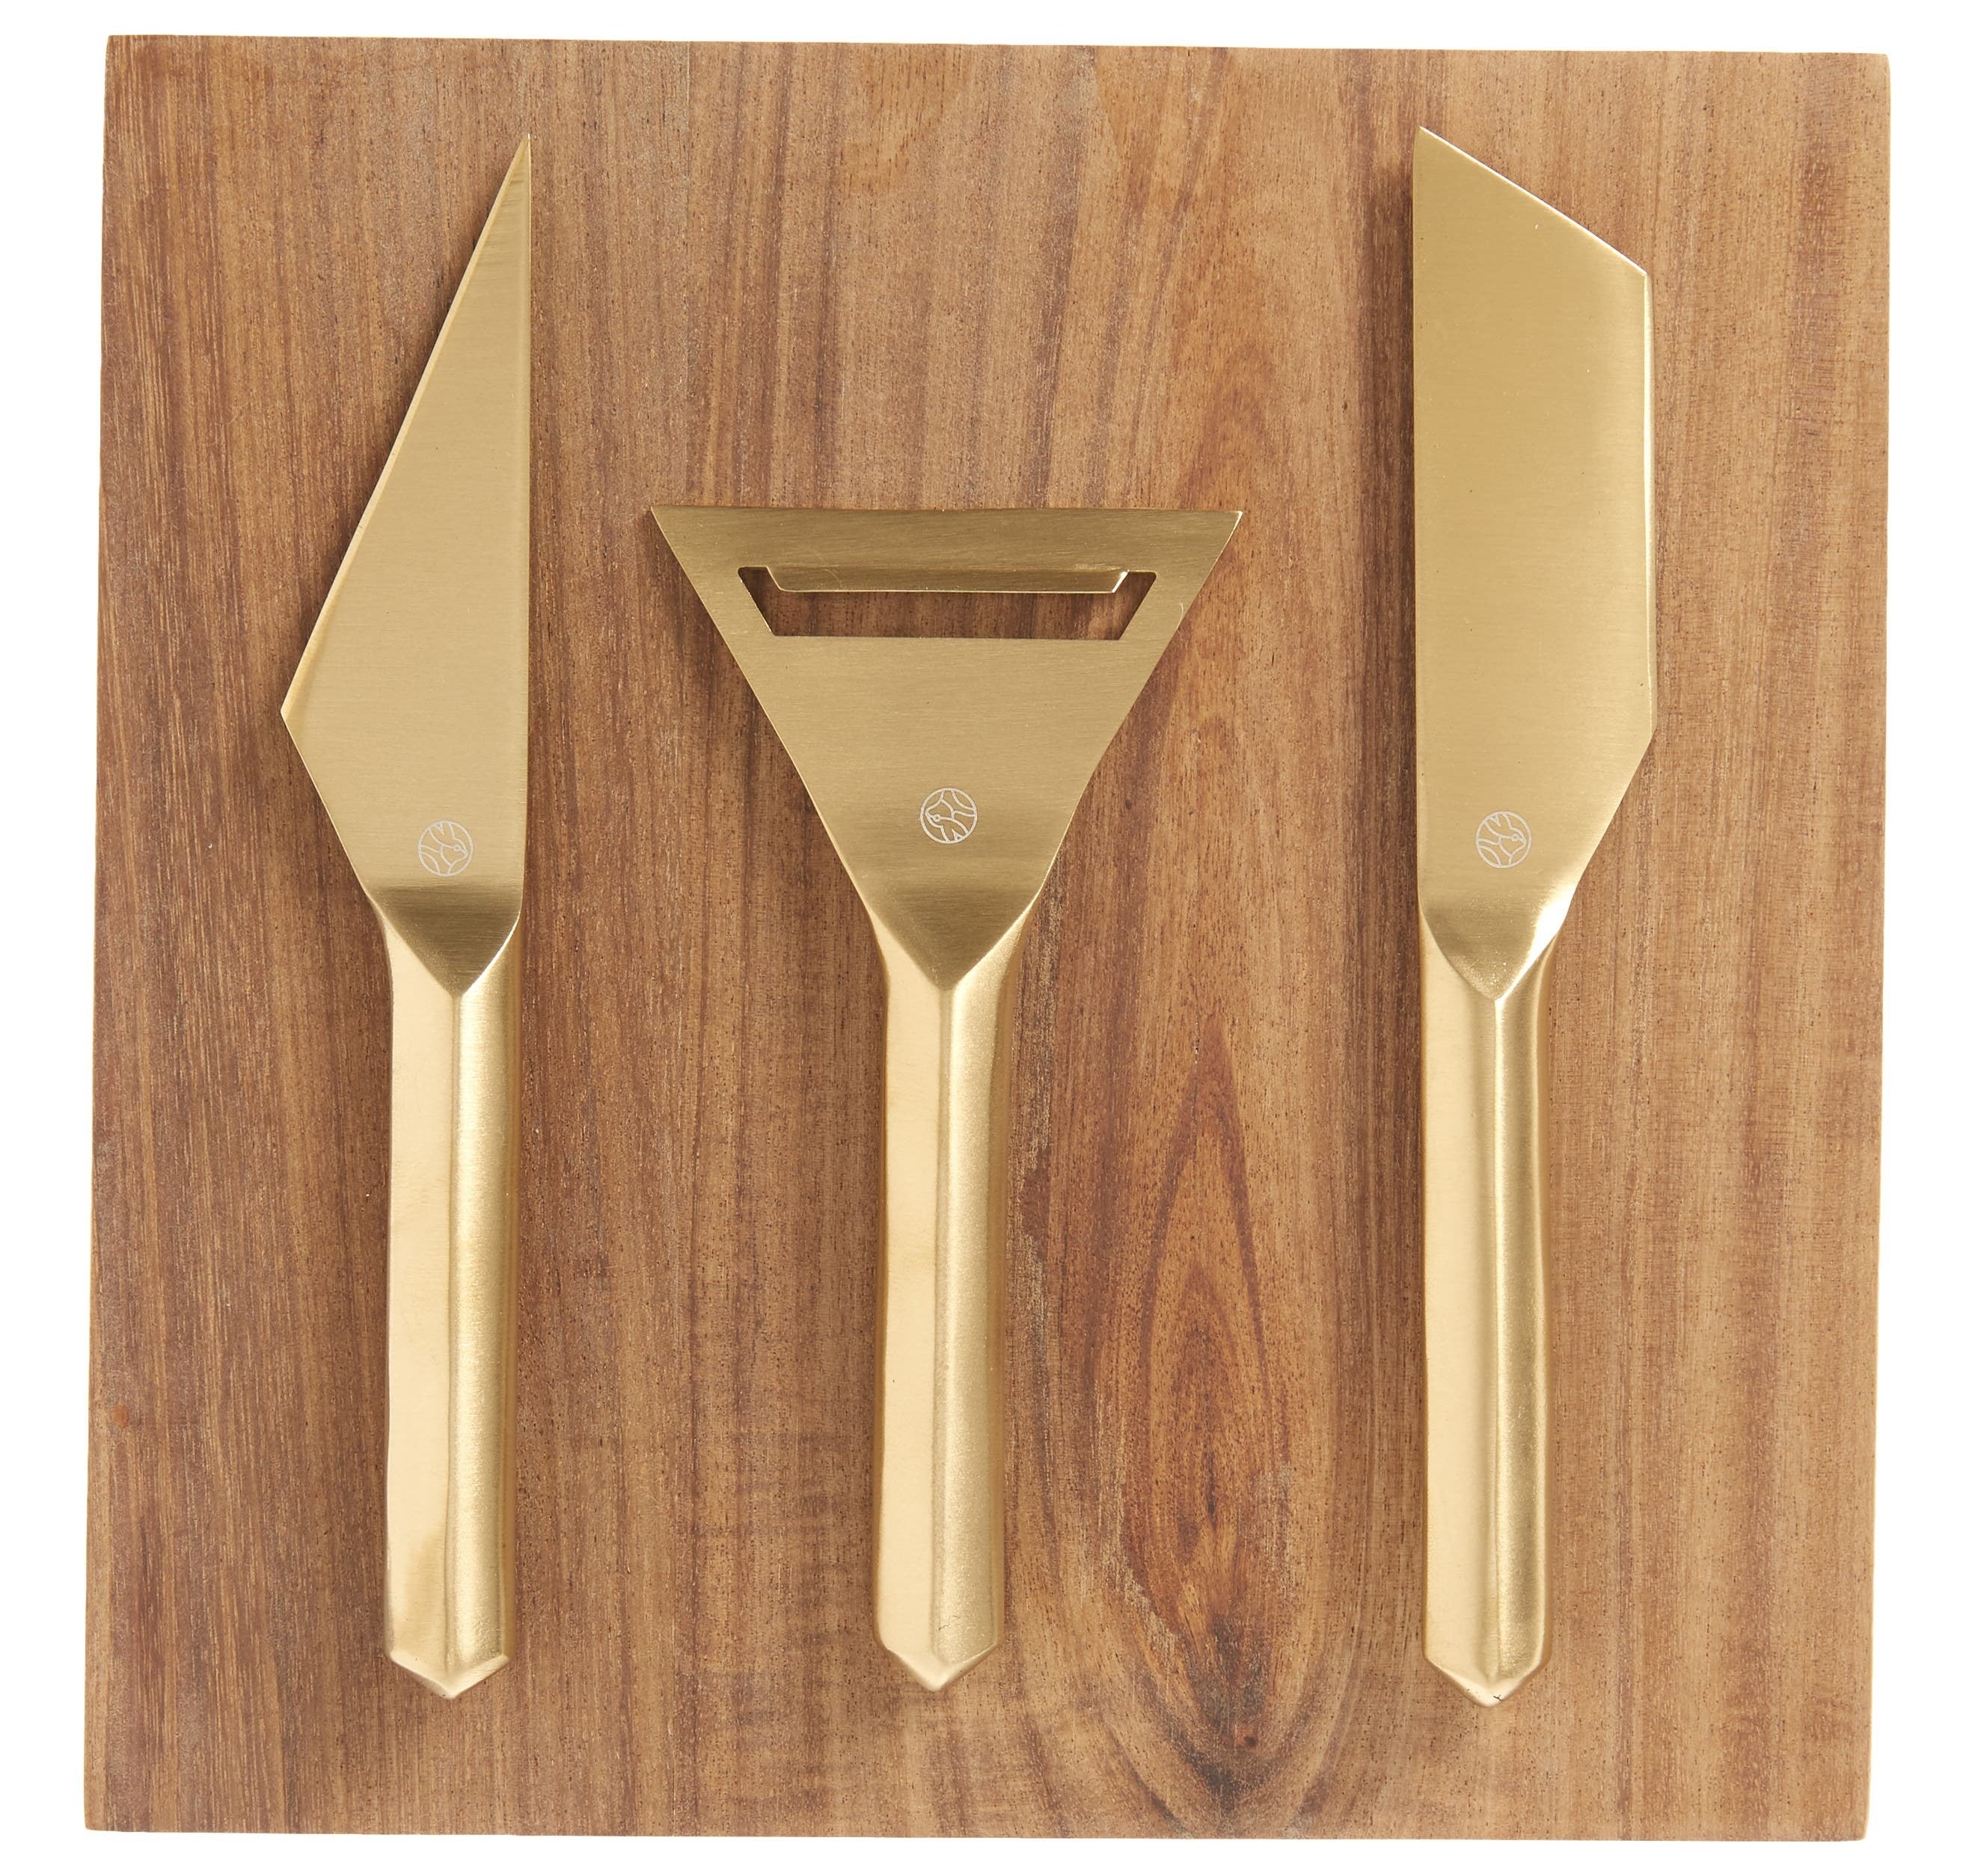 wooden cheese board with three gold serving utensils